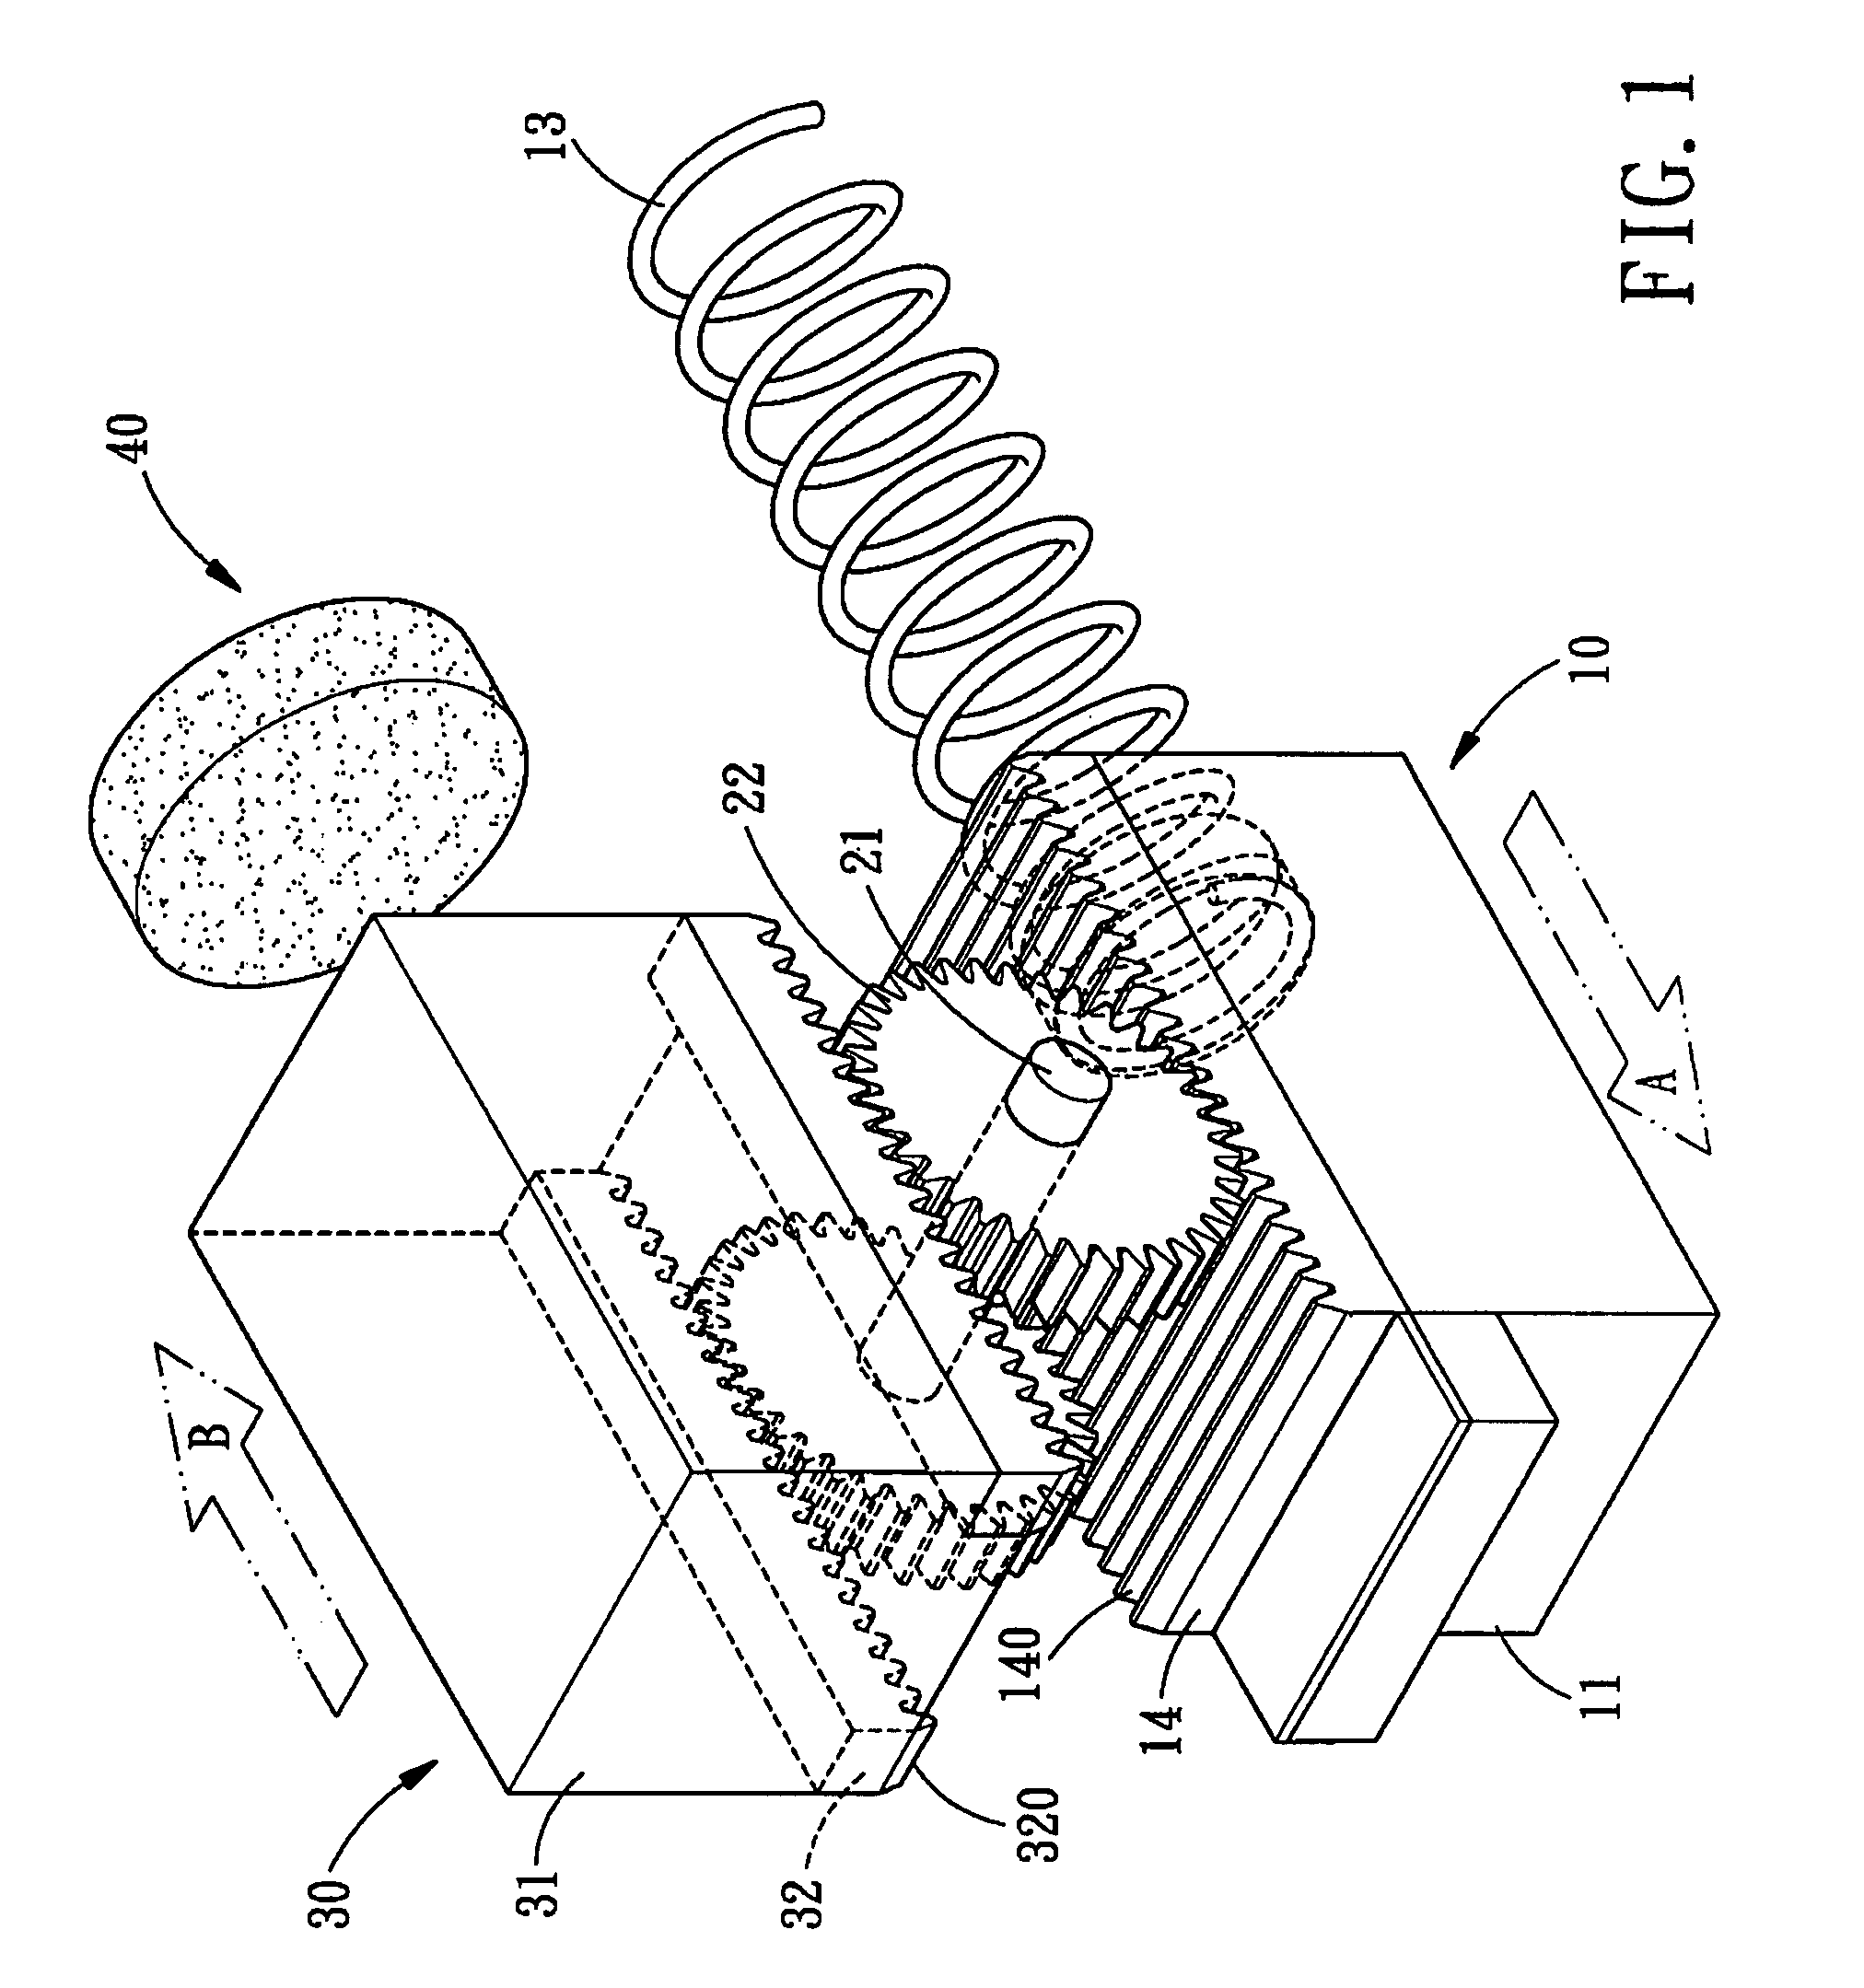 Counterforce-counteracting device for a nailer